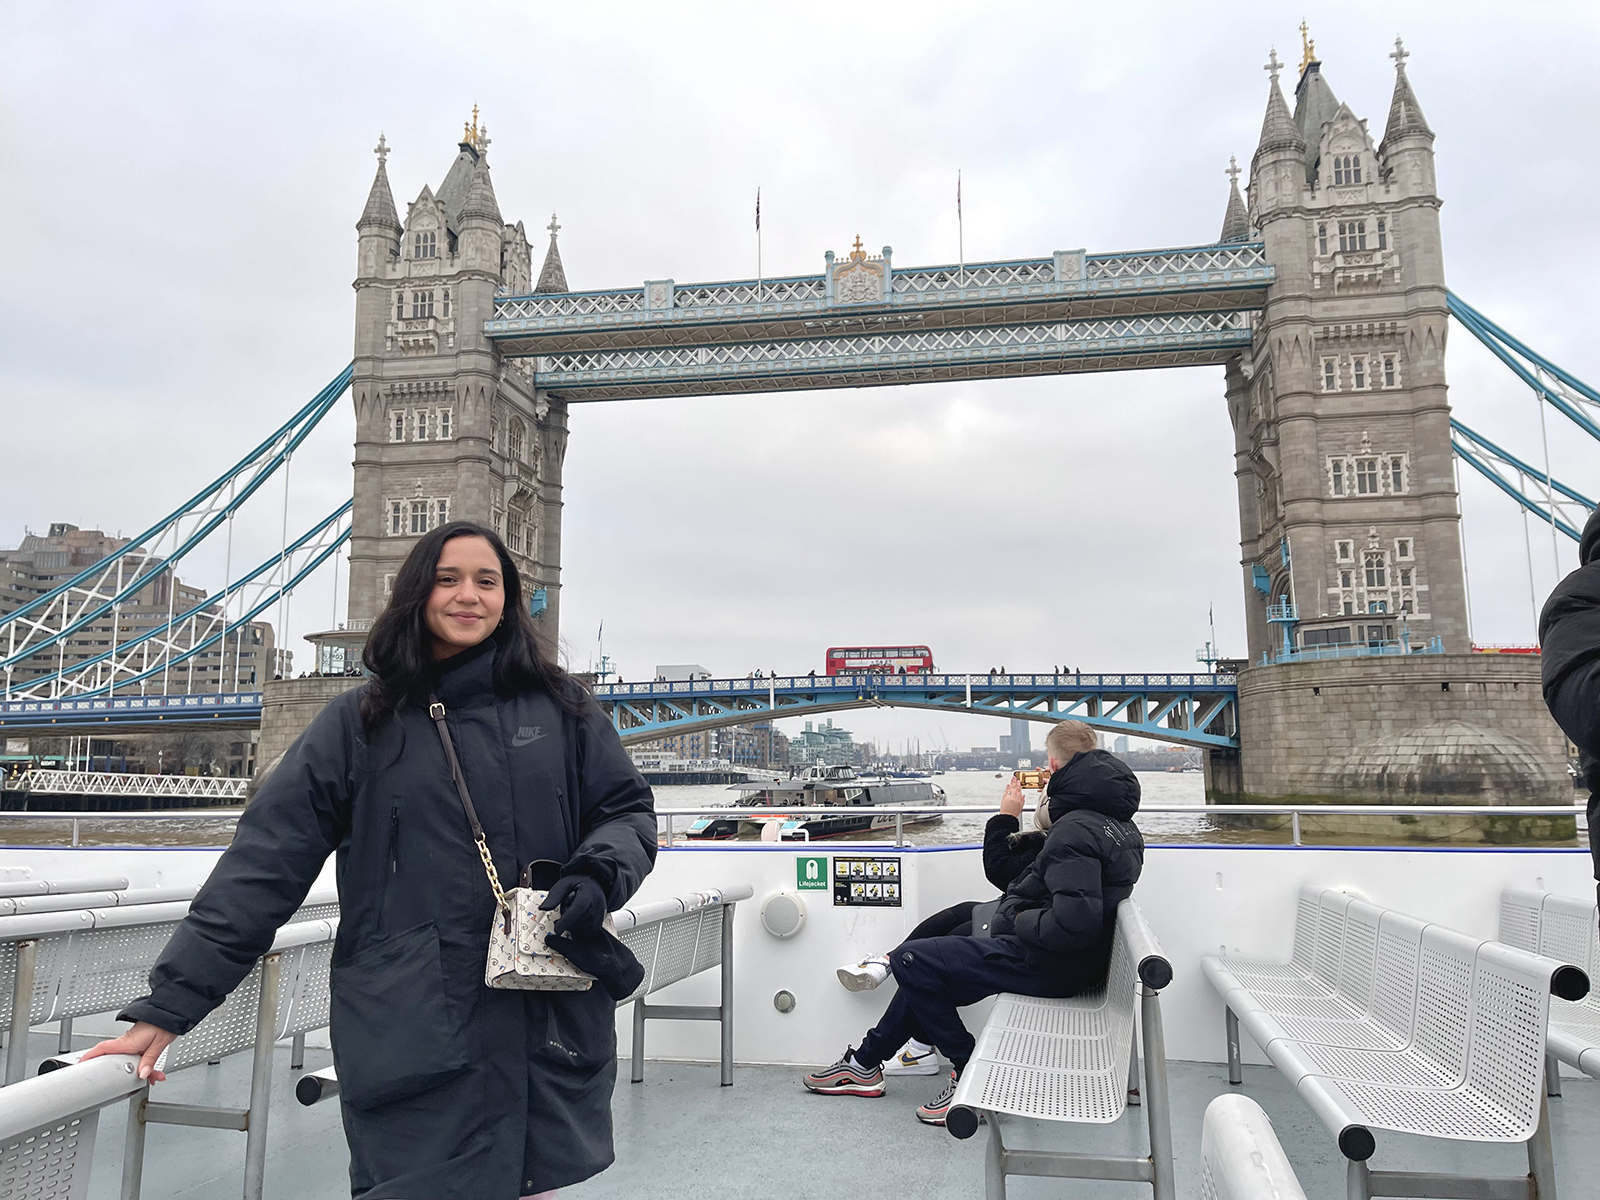 A woman stands on a sightseeing boat with old London bridges in the background